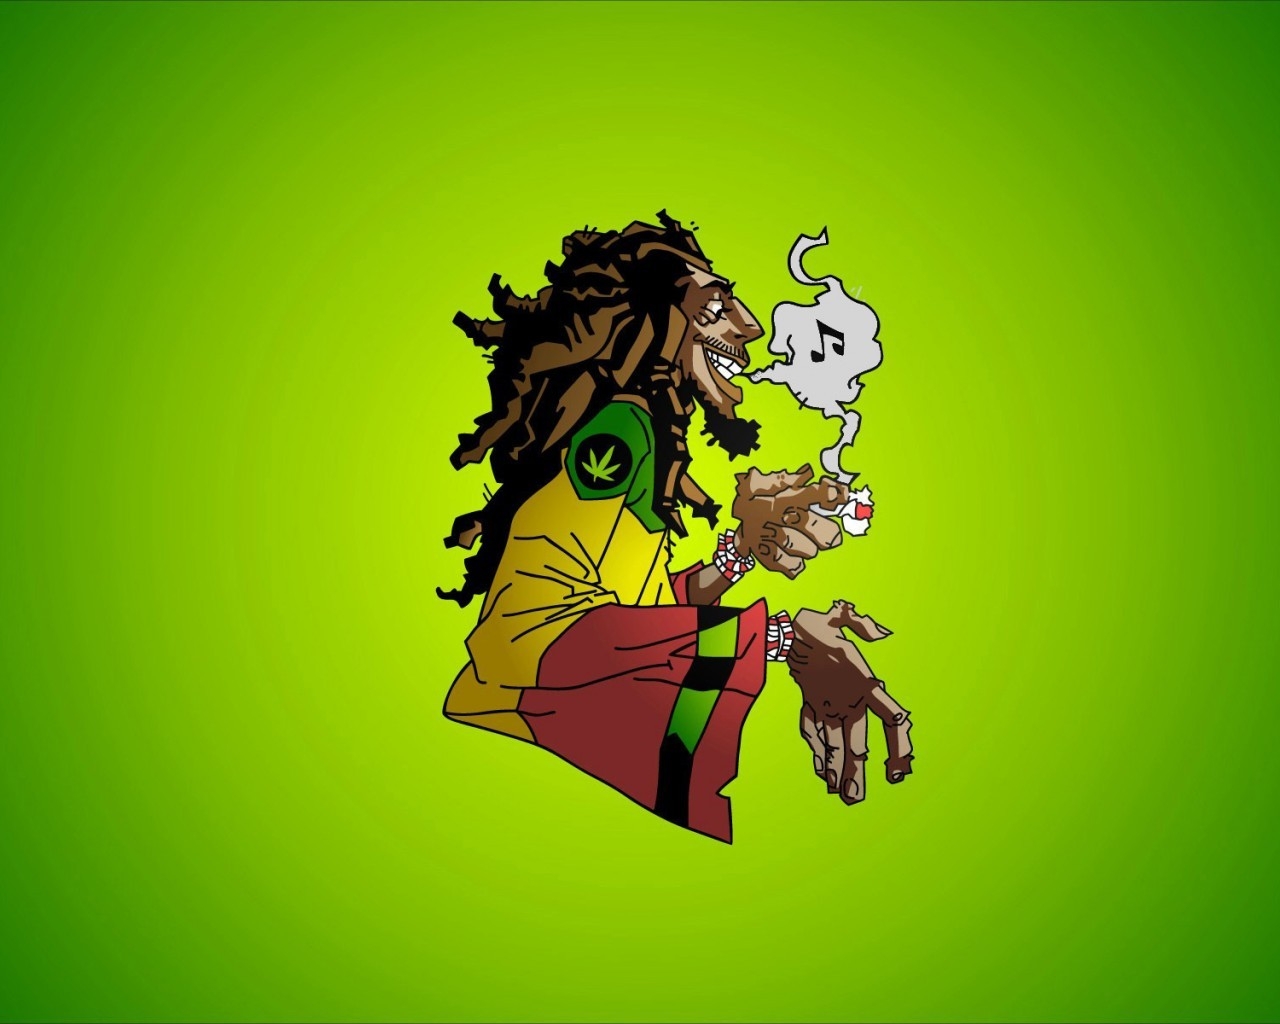 Bob Marley Caricature for 1280 x 1024 resolution